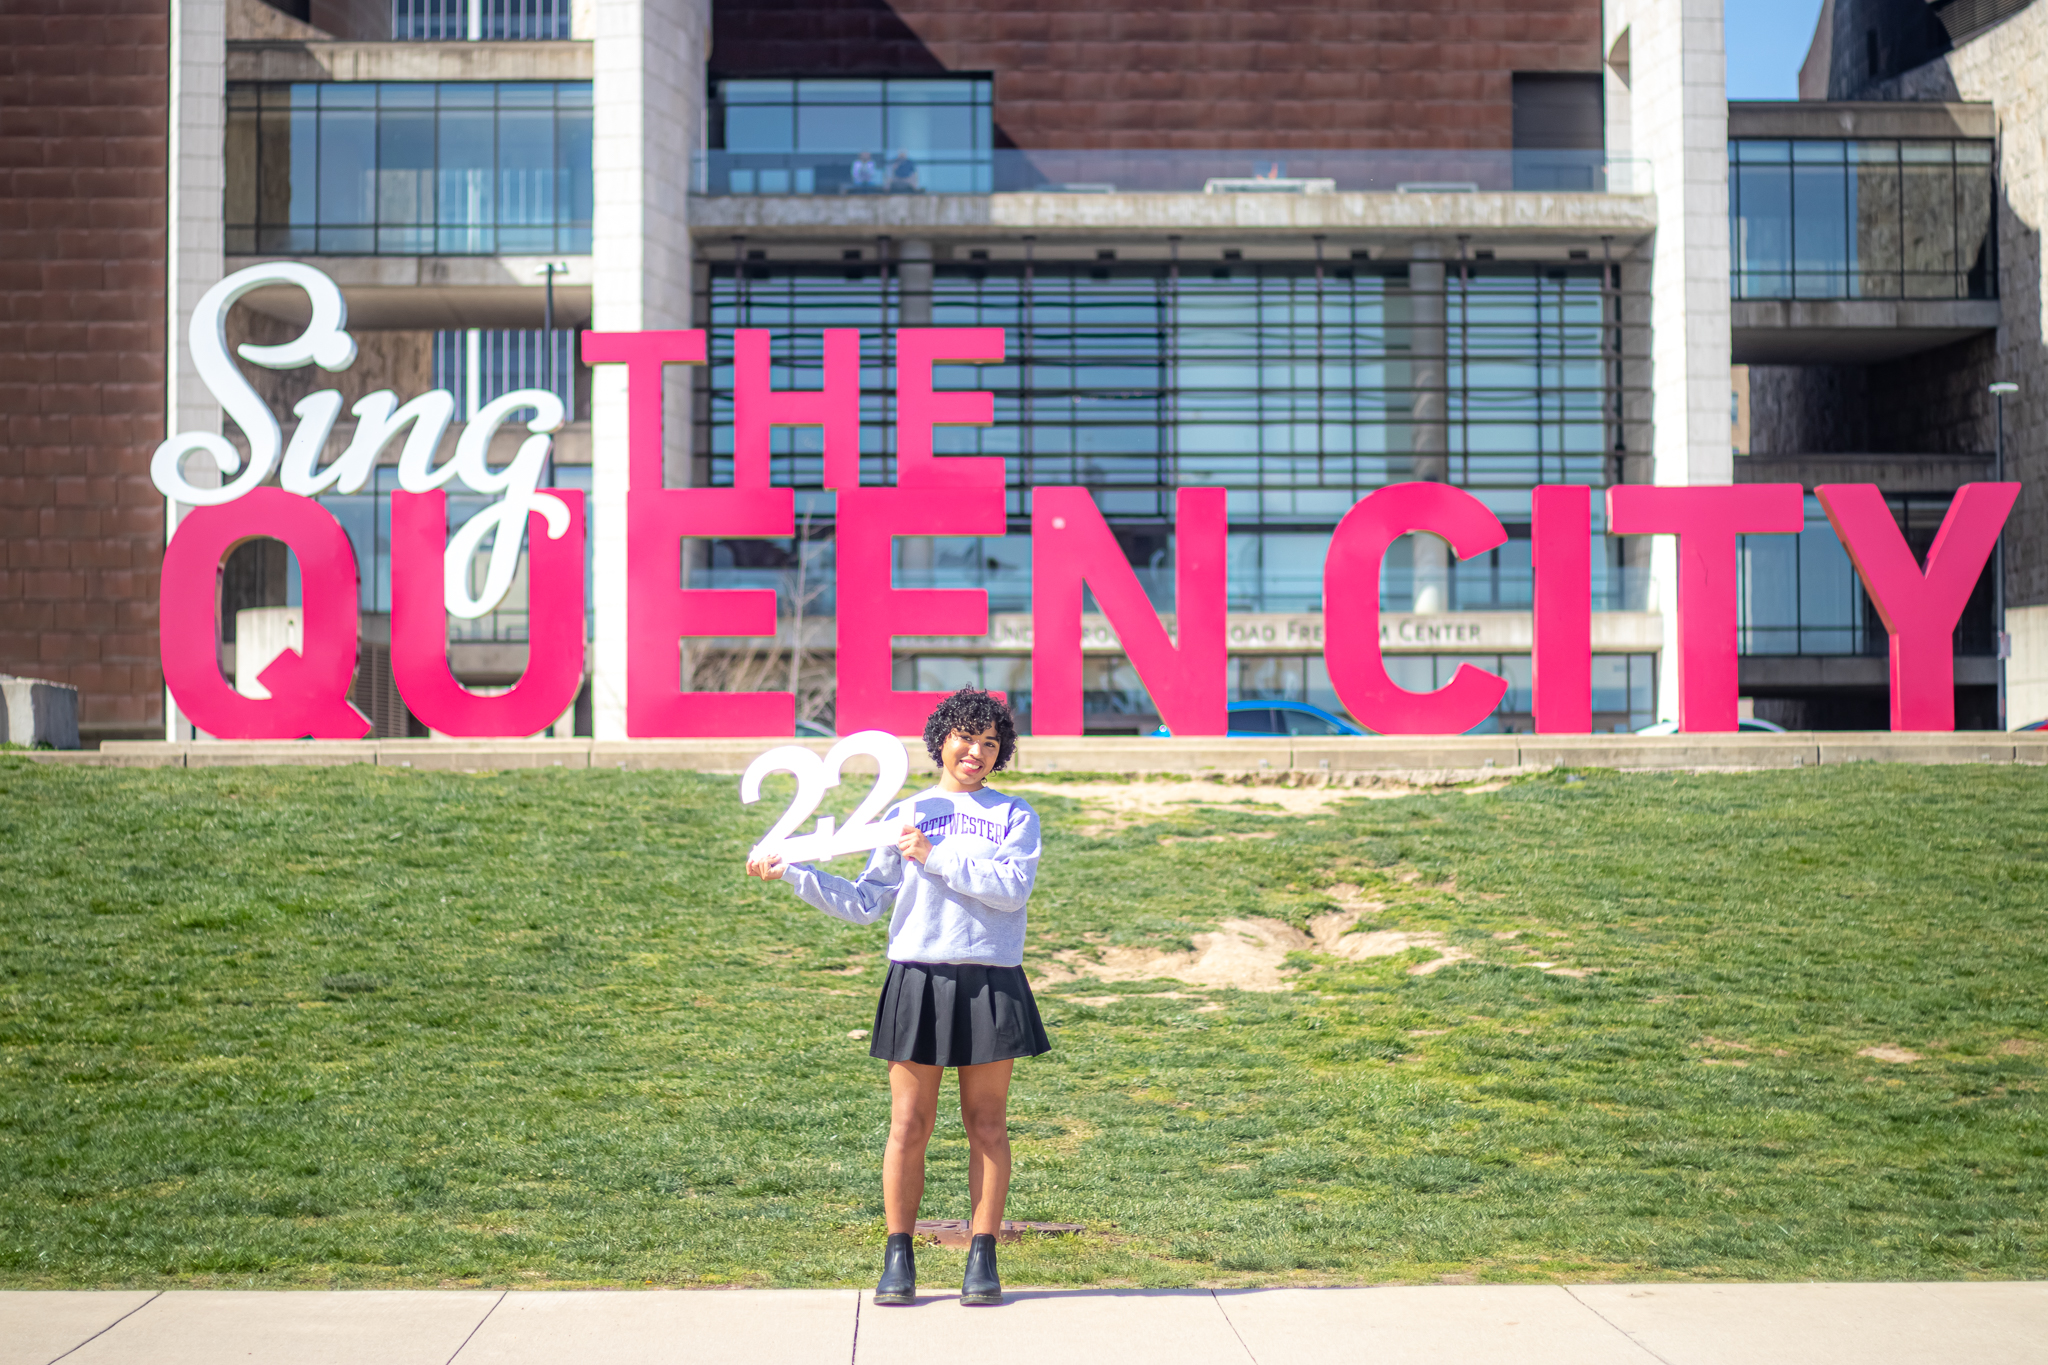 Senior photo ideas taken in a meaningful location make great senior picture options. 22 grad in front of a well-known sign like this one "Sing the Queen City."